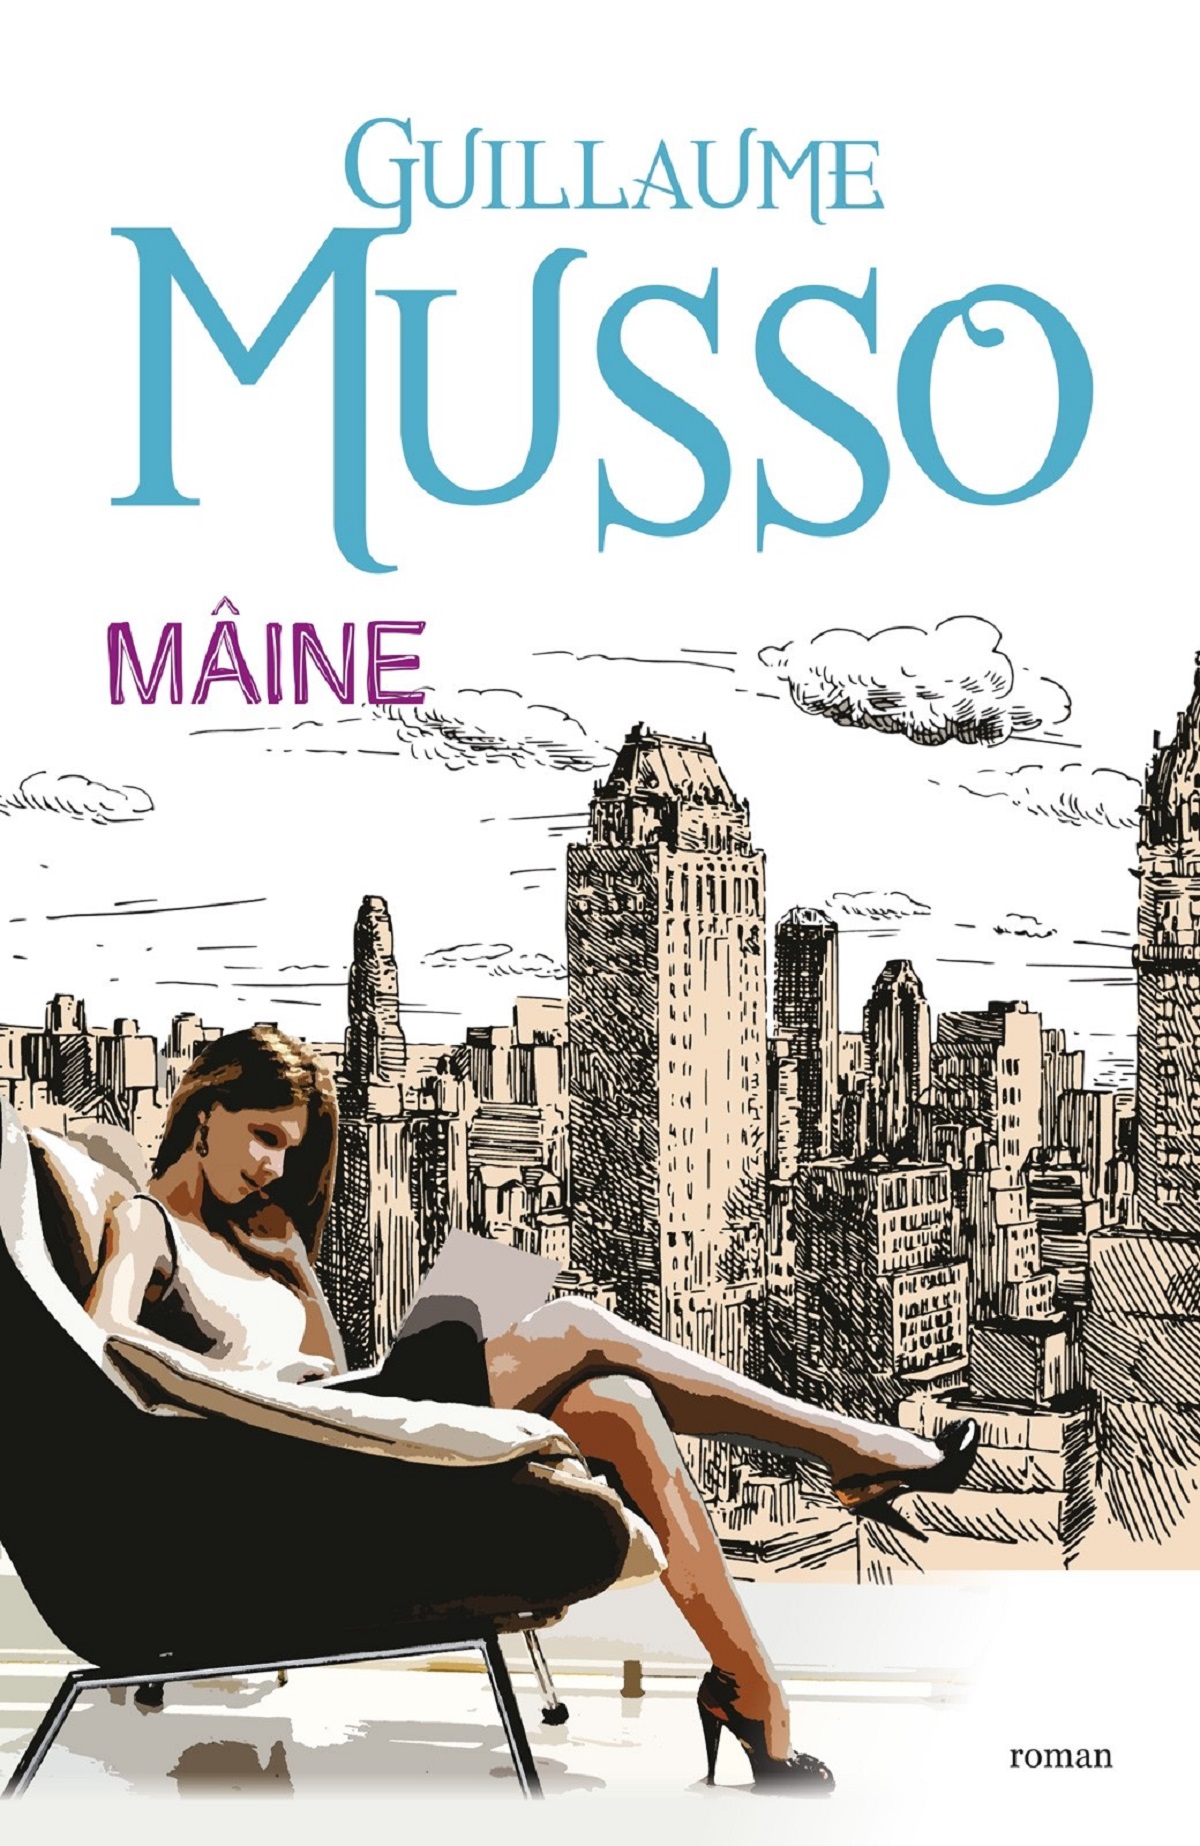 Maine - Guillaume Musso